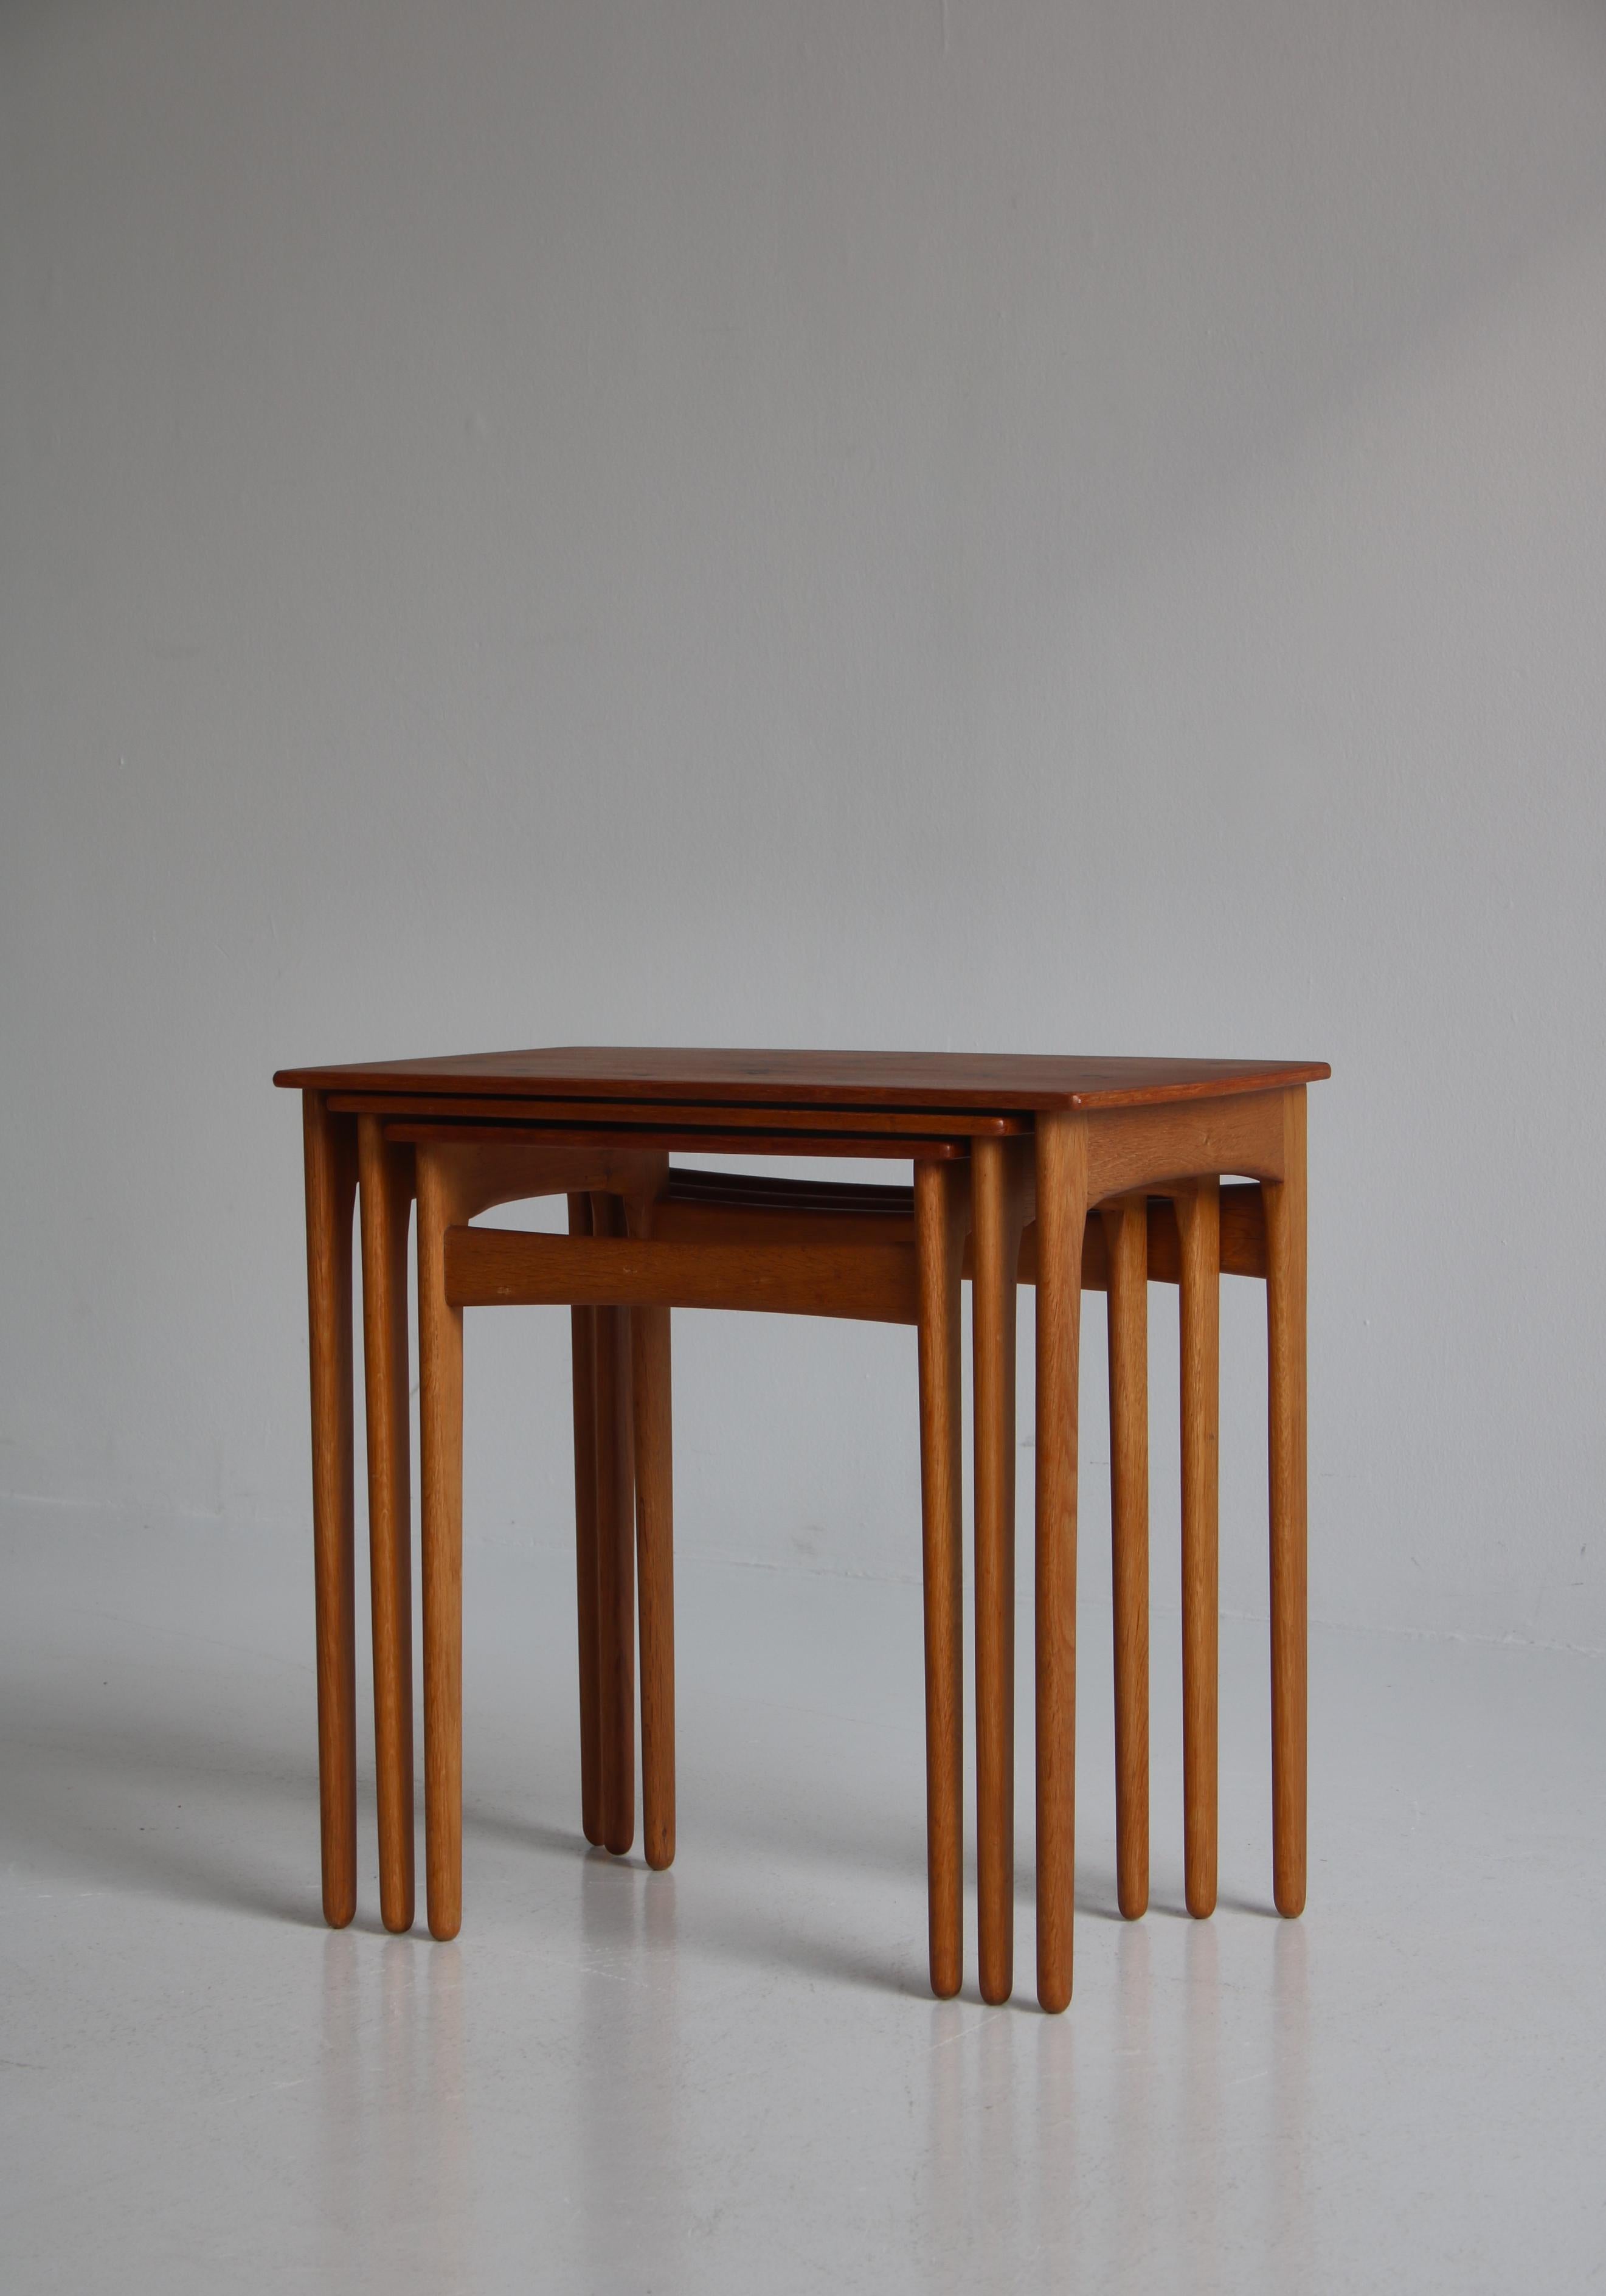 Danish Nesting Tables in Teak and oak by Svend Aage Madsen, Denmark, 1950s For Sale